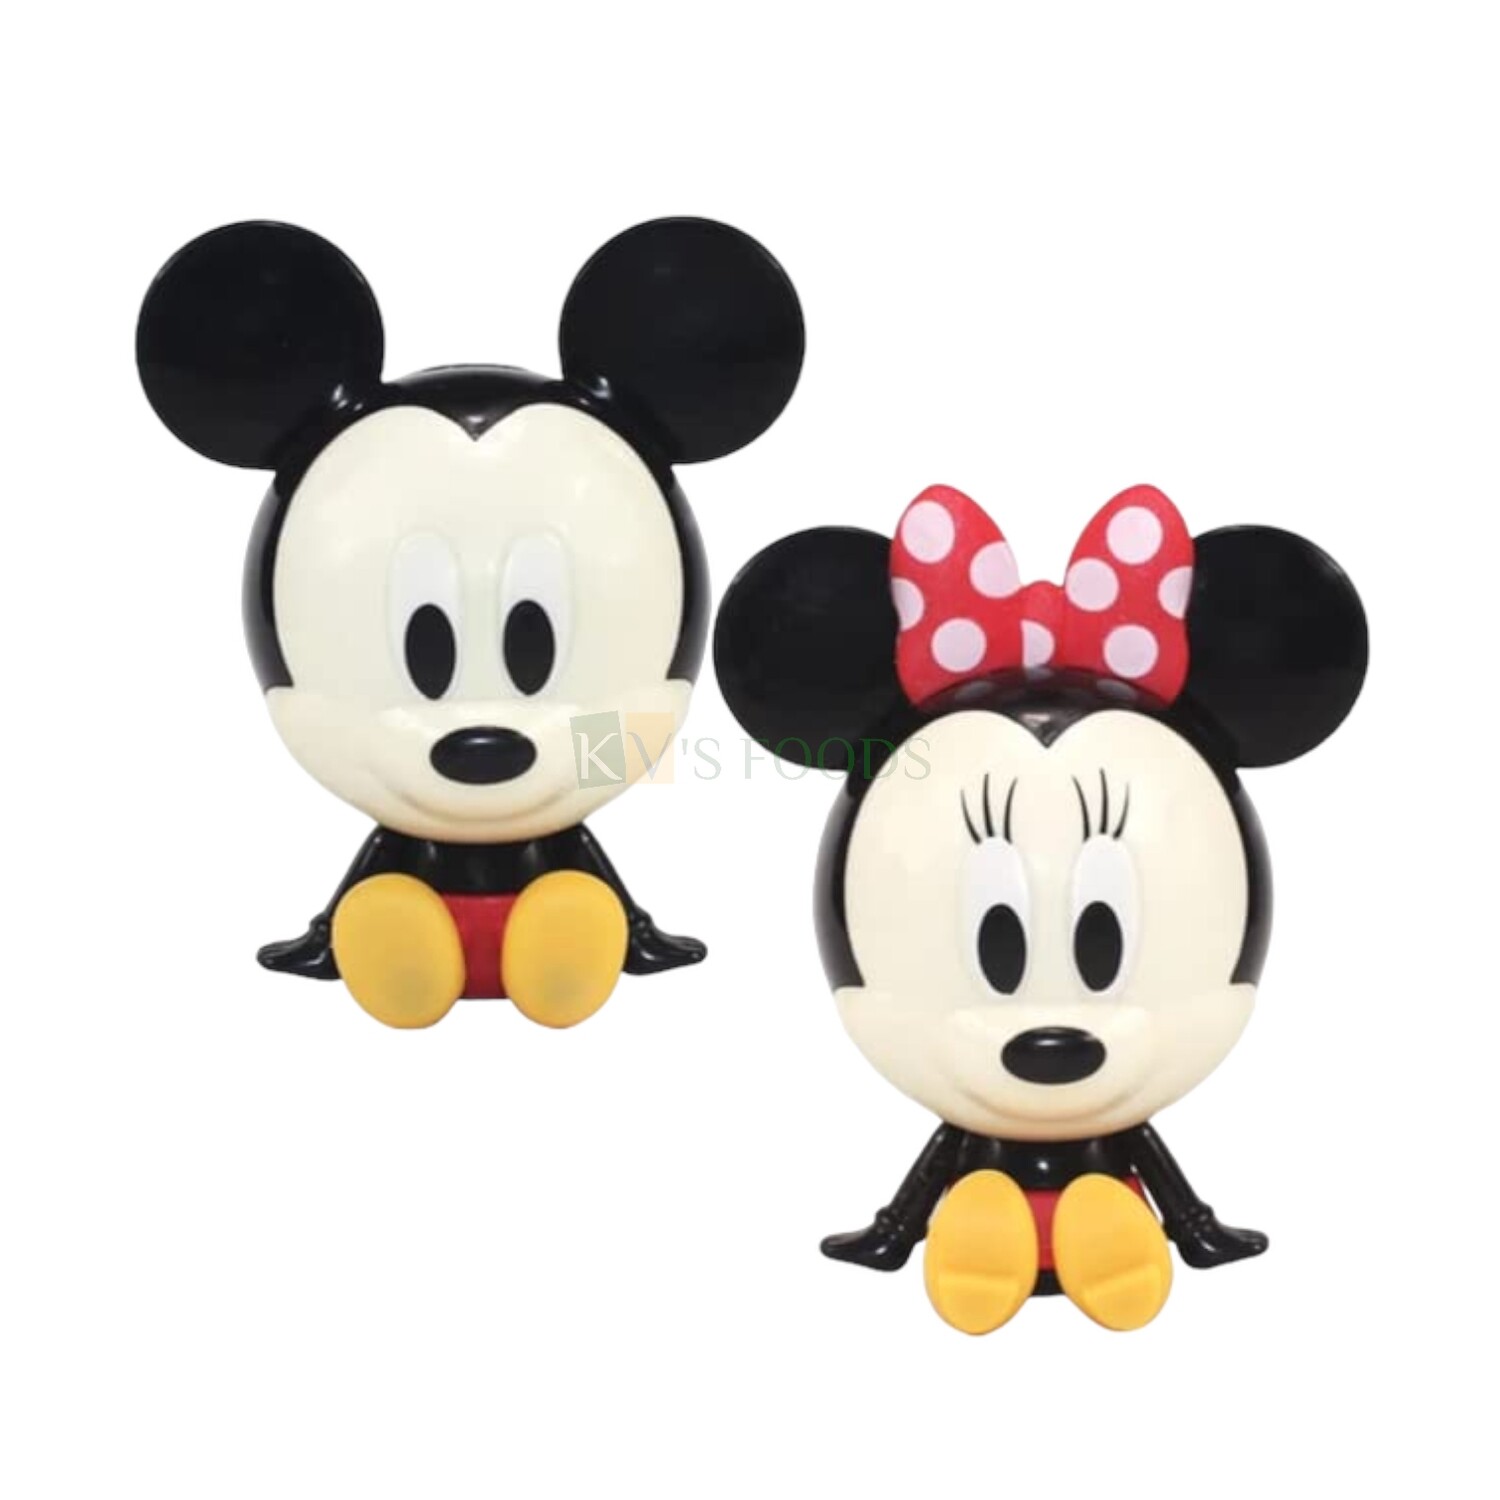 2 Pcs Sets Cute Mickey Minnie Mouse Seated Cake Toppers for Cake Decorating, Action Figure Disney Table Decor Themed Party Decorations, Cake Decoration Supplies, DIY Cake Decor